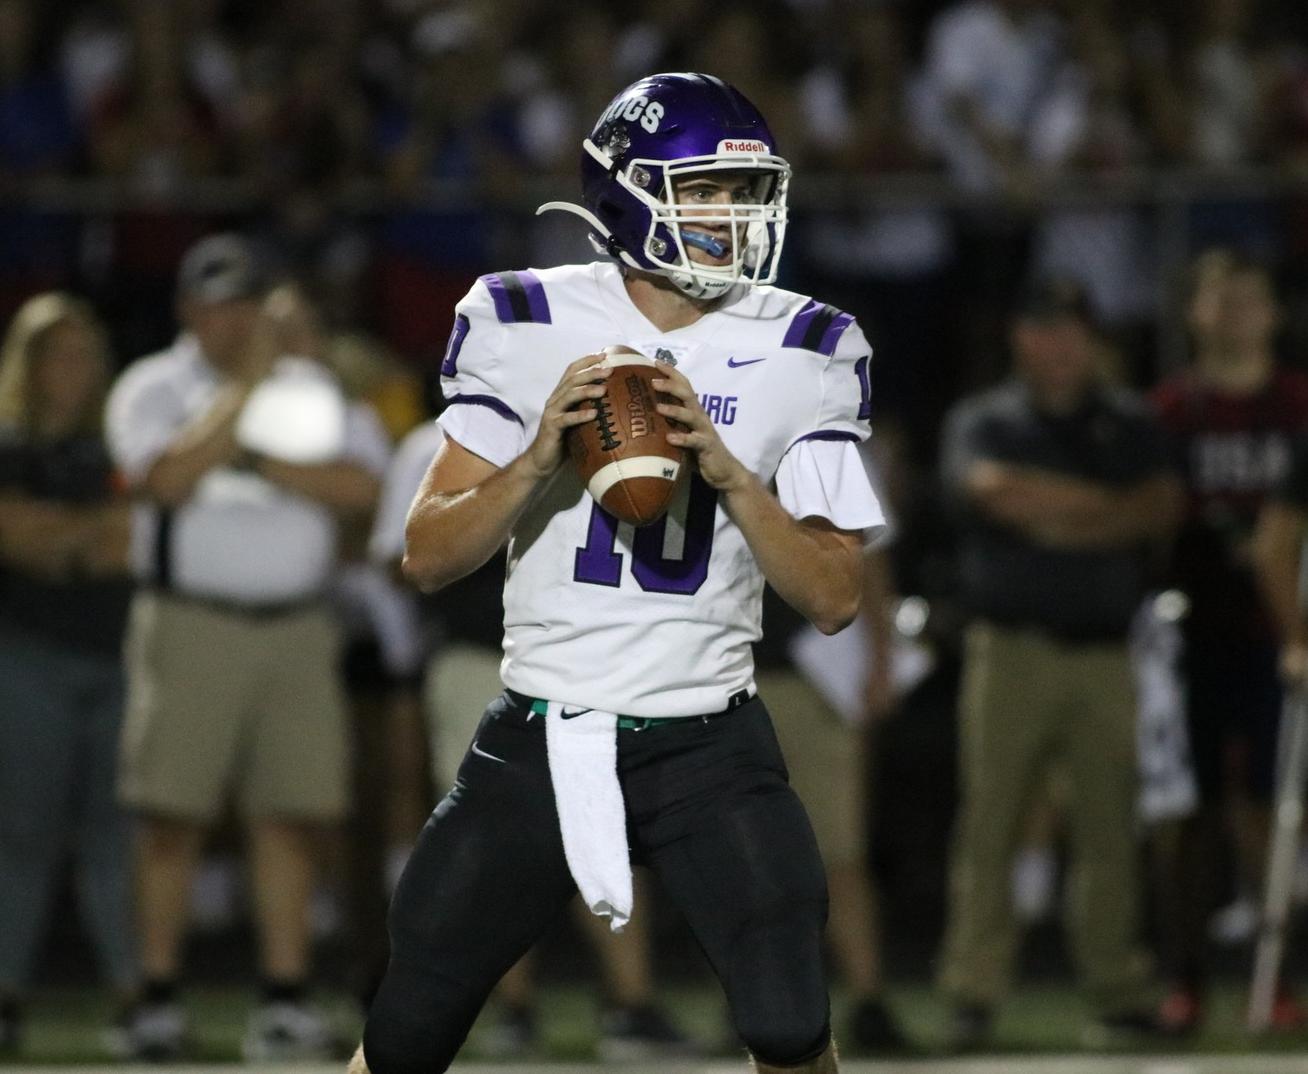 No. 9 @BHSdogsfootball to host No. 6 Fishers on Homecoming weekend